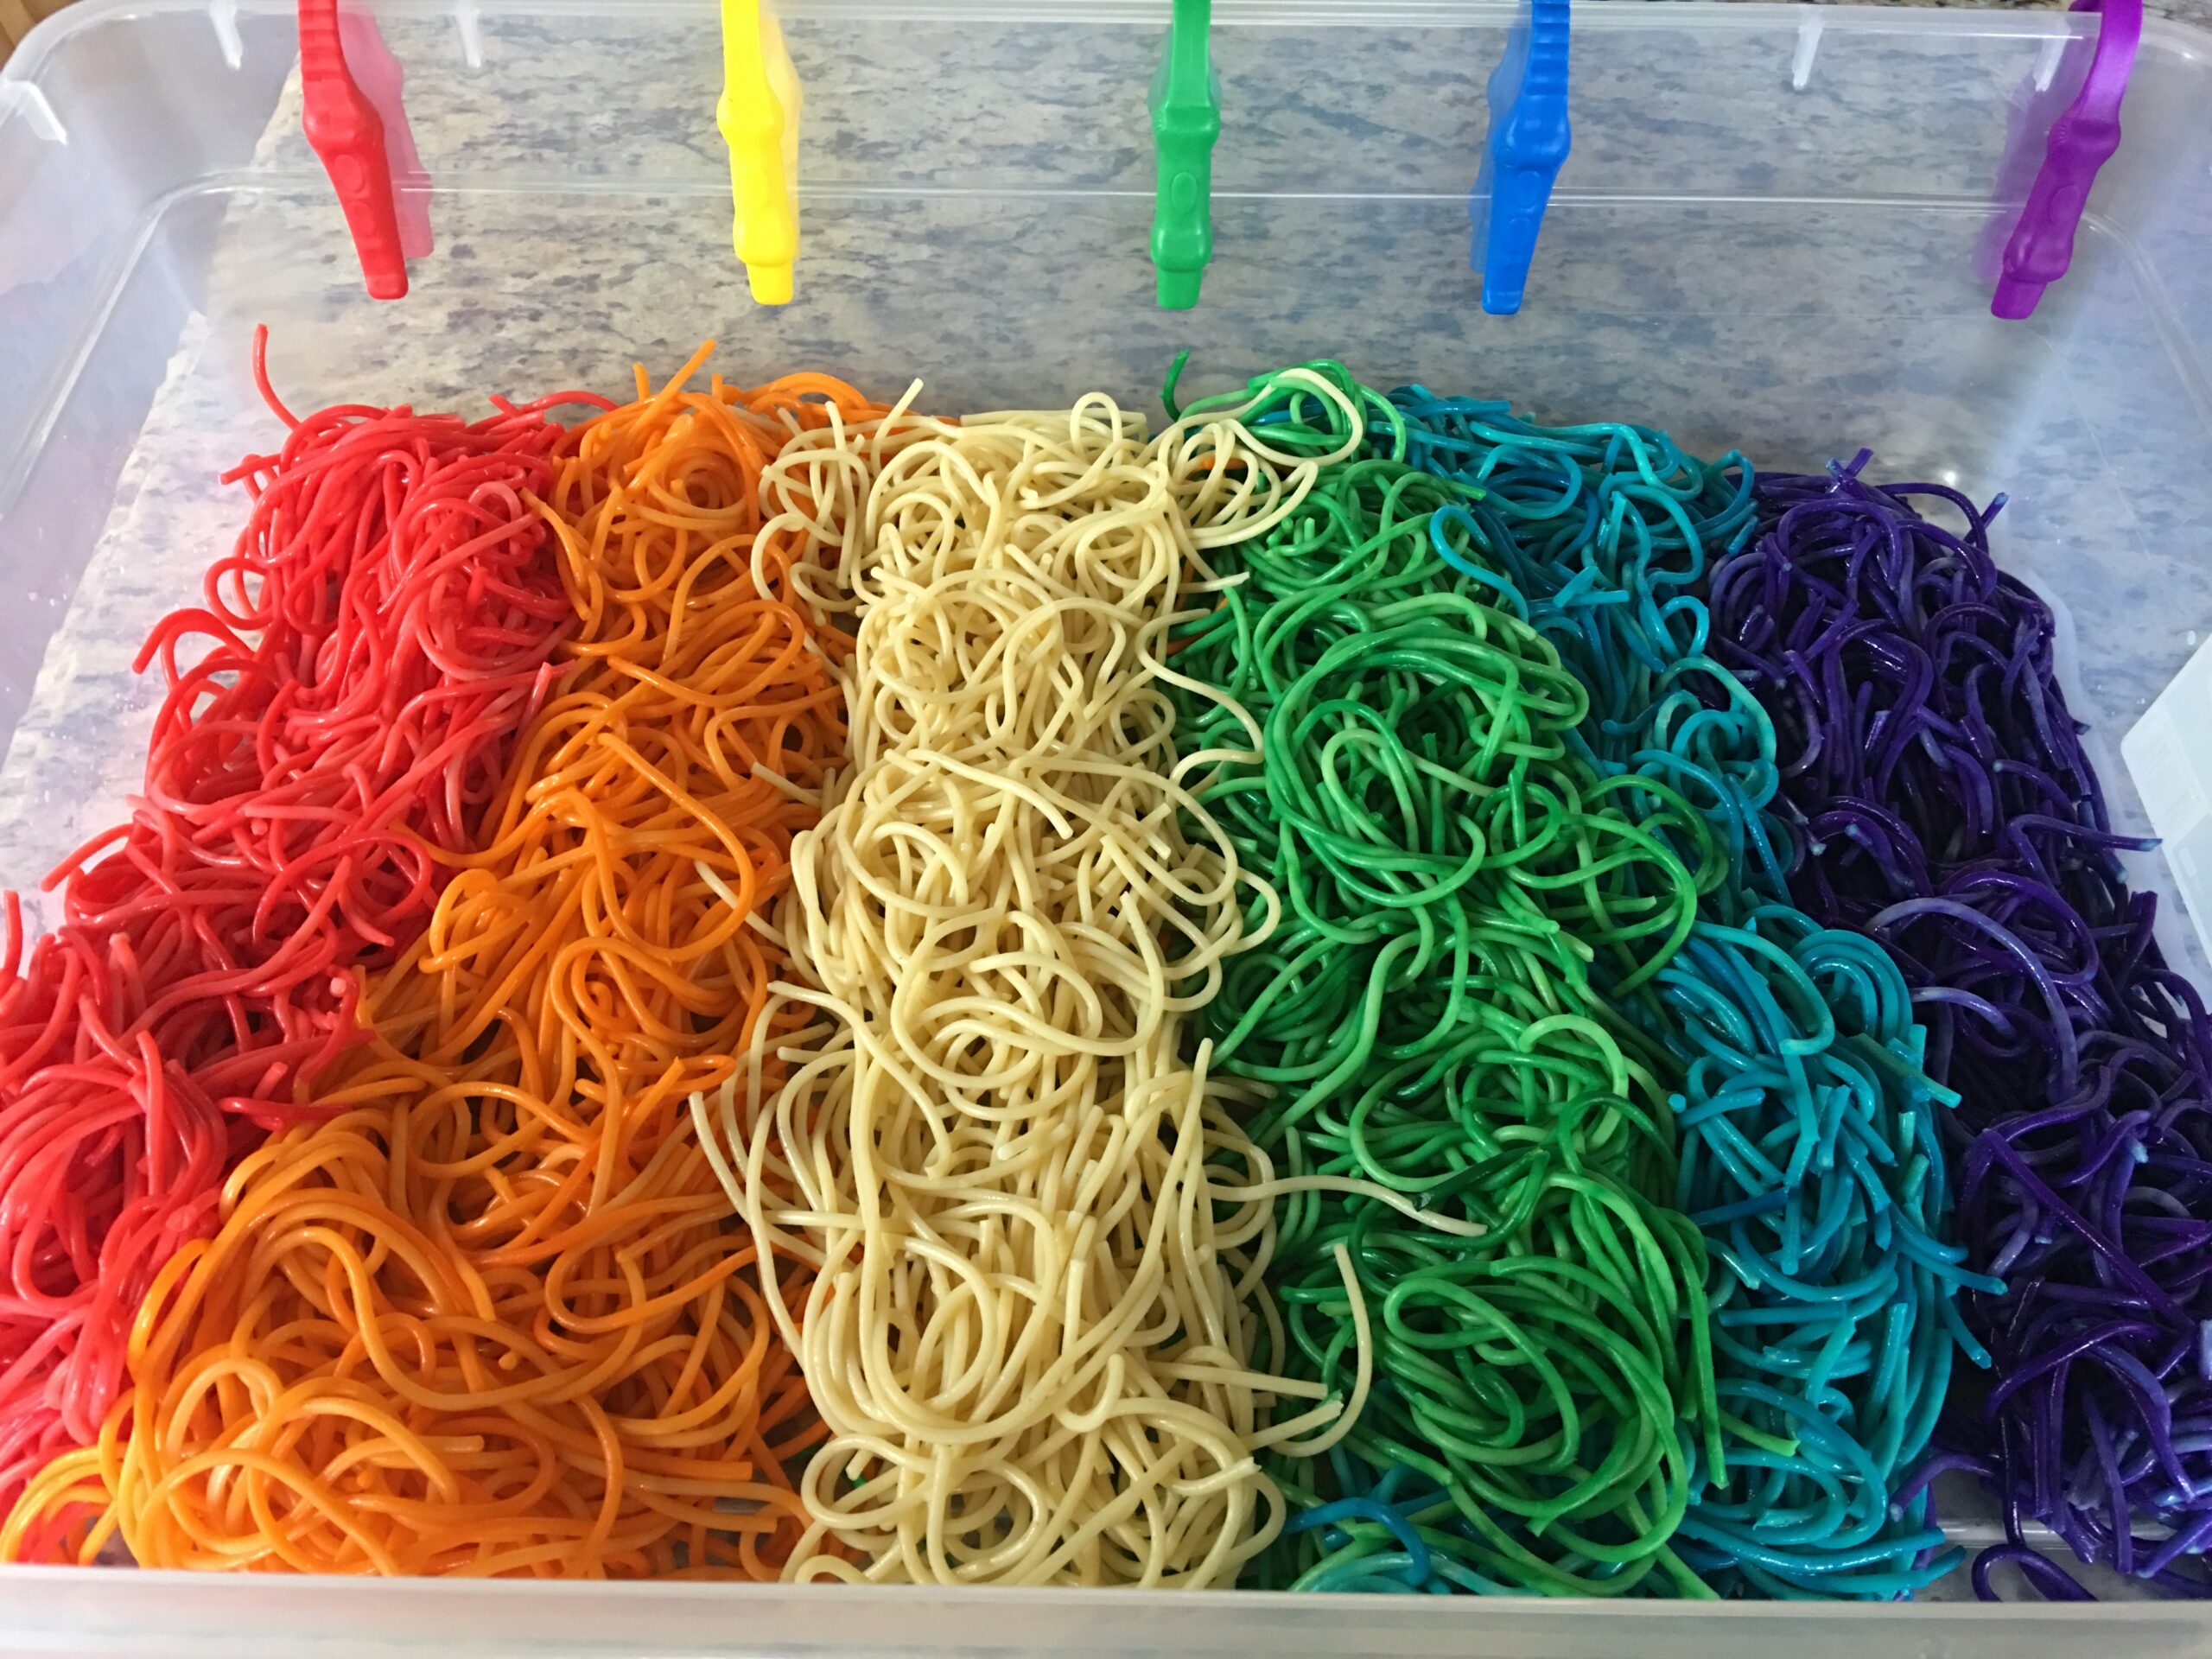 This simple Rainbow sensory bin is great for color recognition, increasing fine motor skills, and provides great texture. Rainbow Pasta sensory bins - sensory play is so theraputic for children, great way to increase fine motor skills and provides a safe environment for exploring.